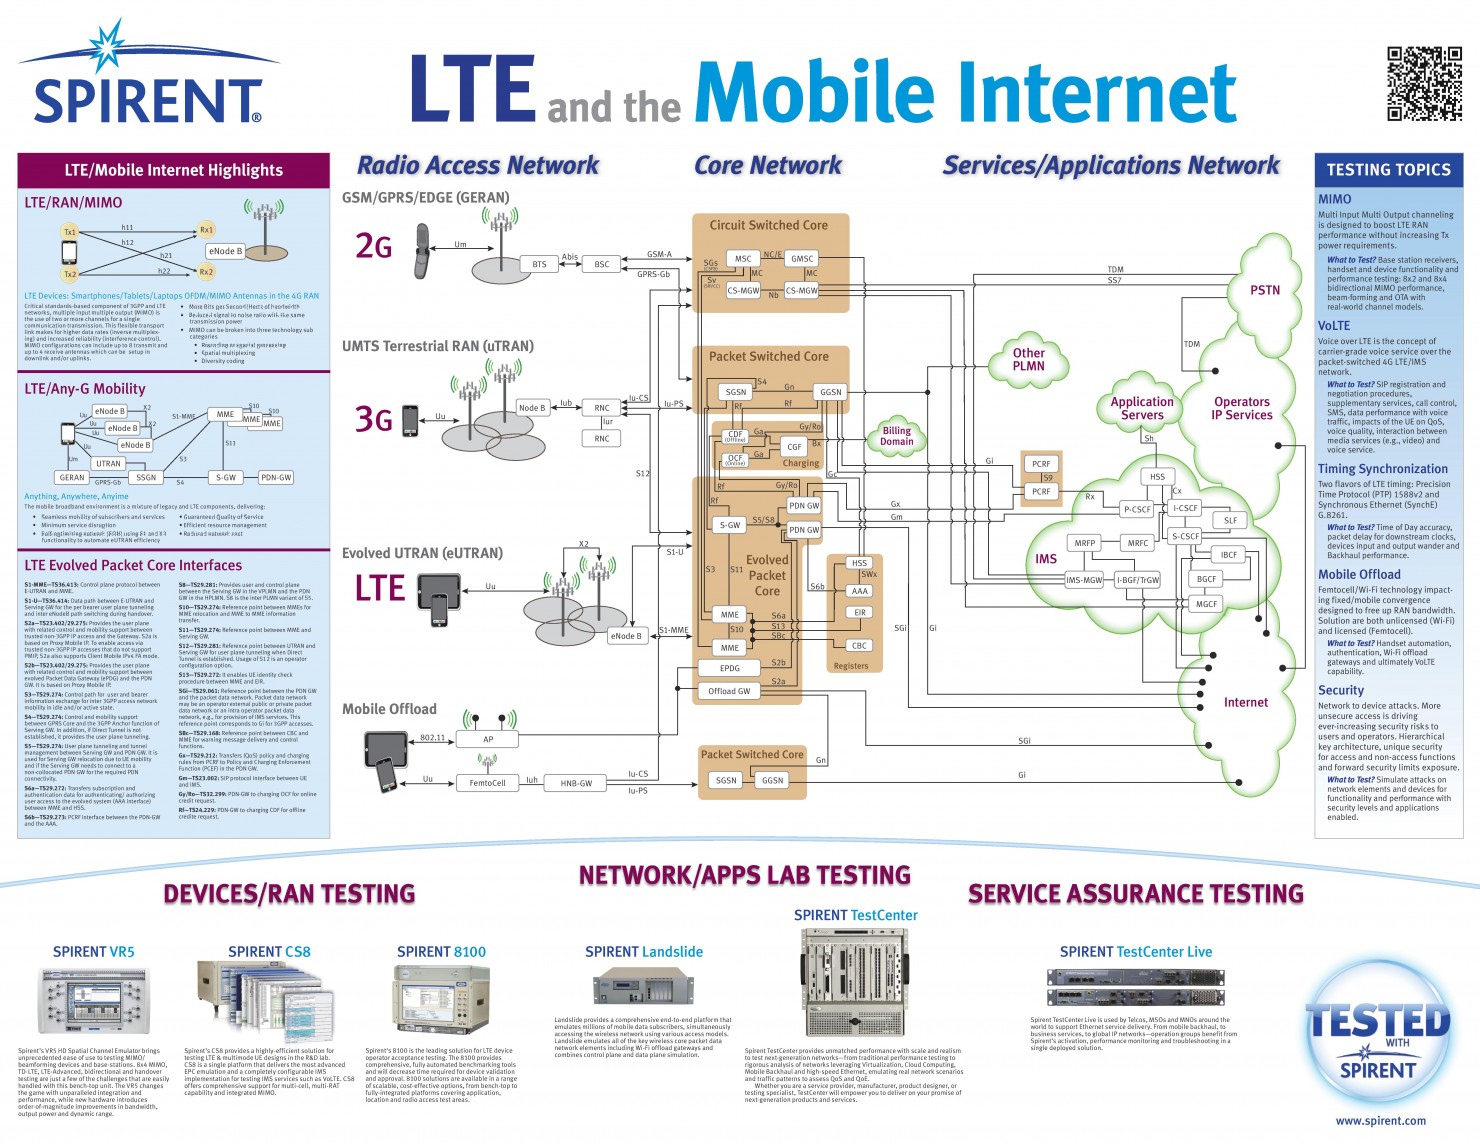 Gprs 2g  Umts 3g  Lte 4g  Architecture Diagram